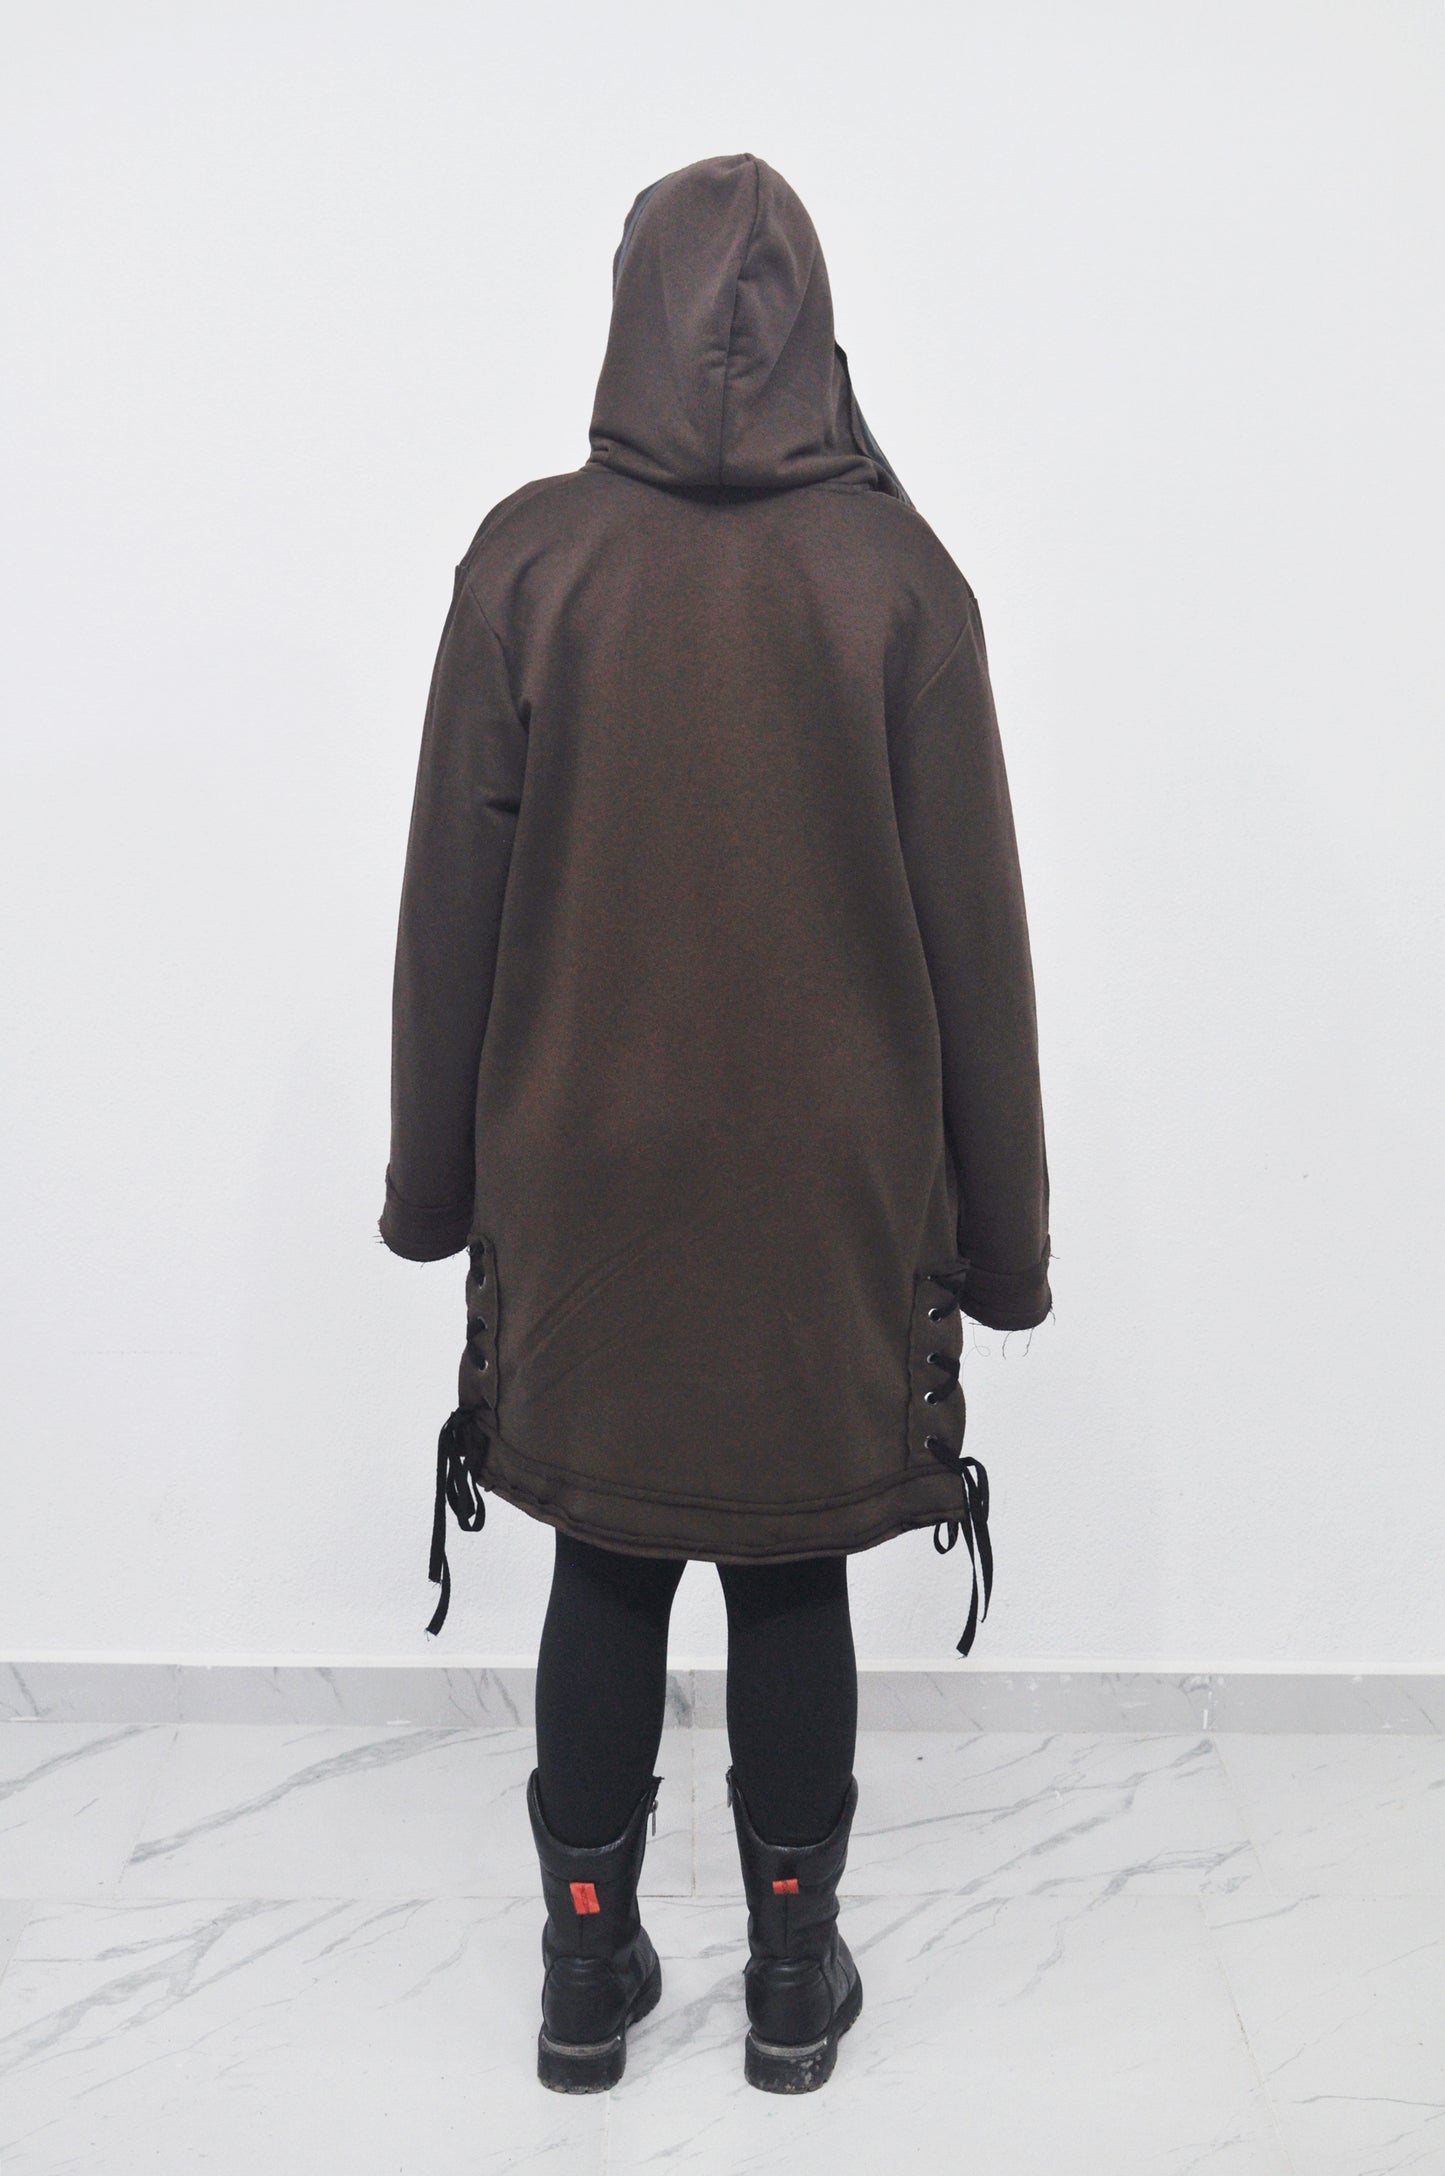 Oversized Hooded Long Leather Stitched Edge Drawstring Tied Up Cardigan / Cloak Cosplay Cape